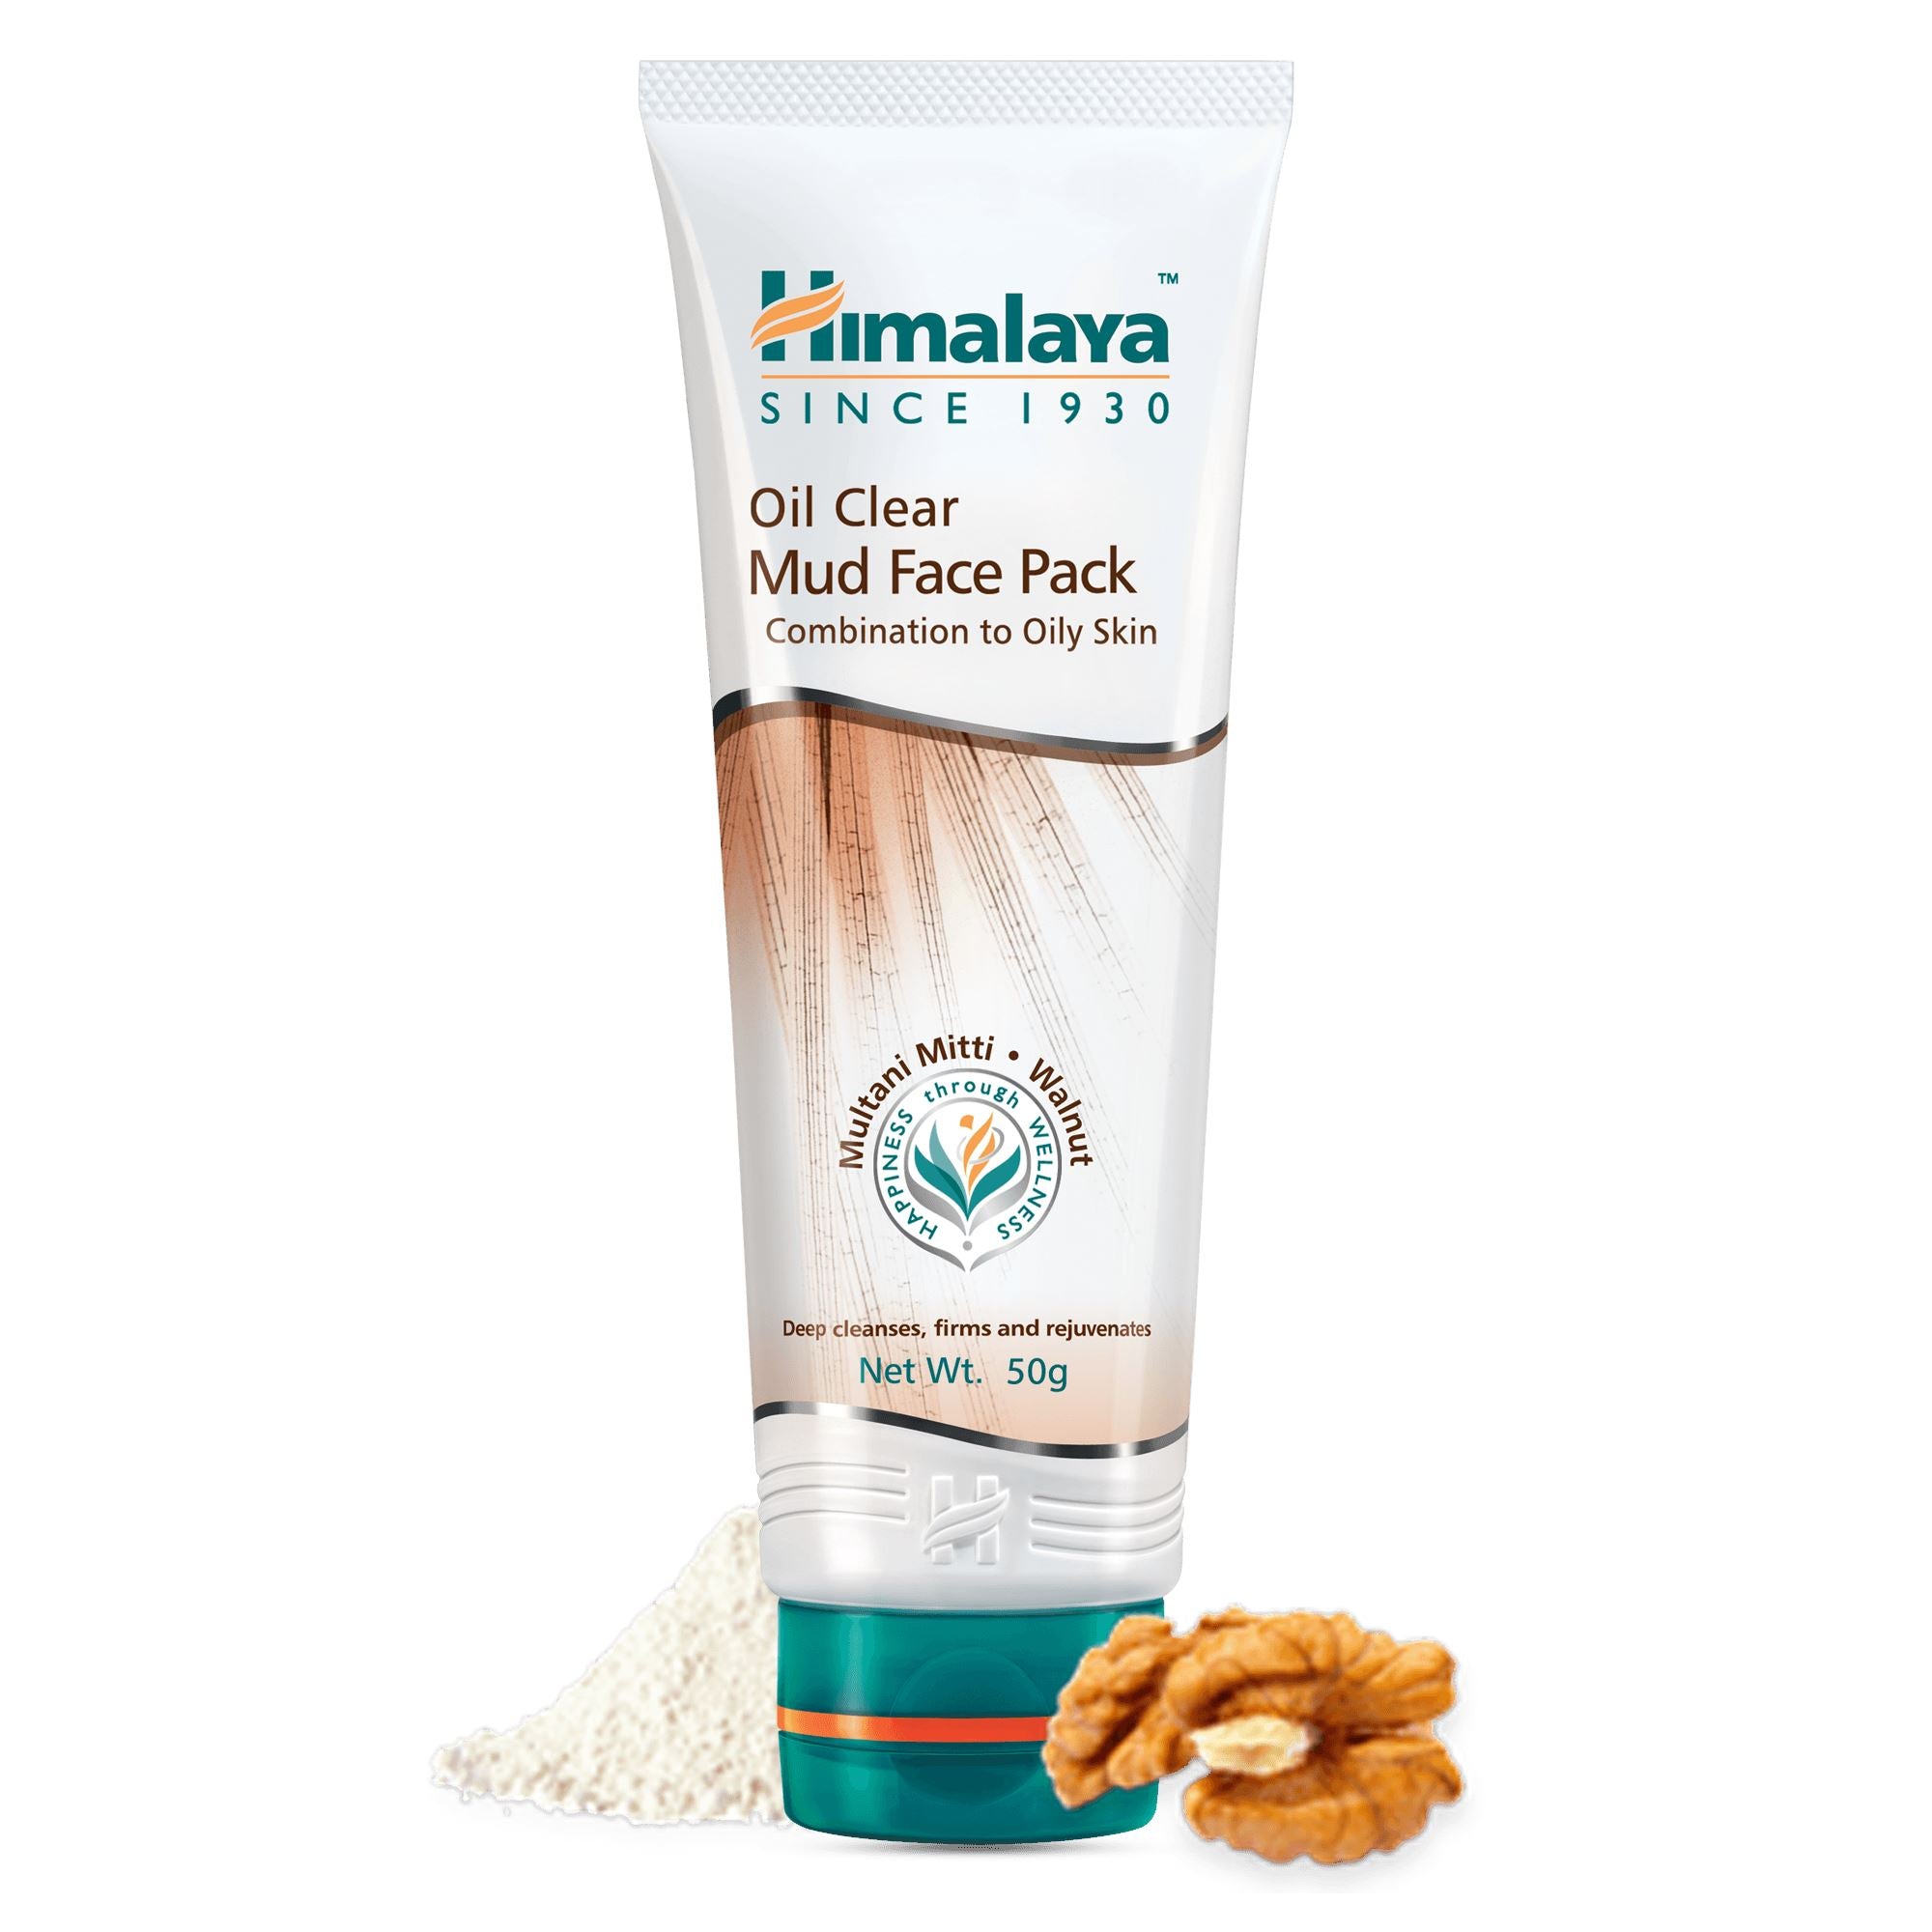 Himalaya Oil Clear Mud Face Pack 50g - Deep cleanses, firms and rejuvenates